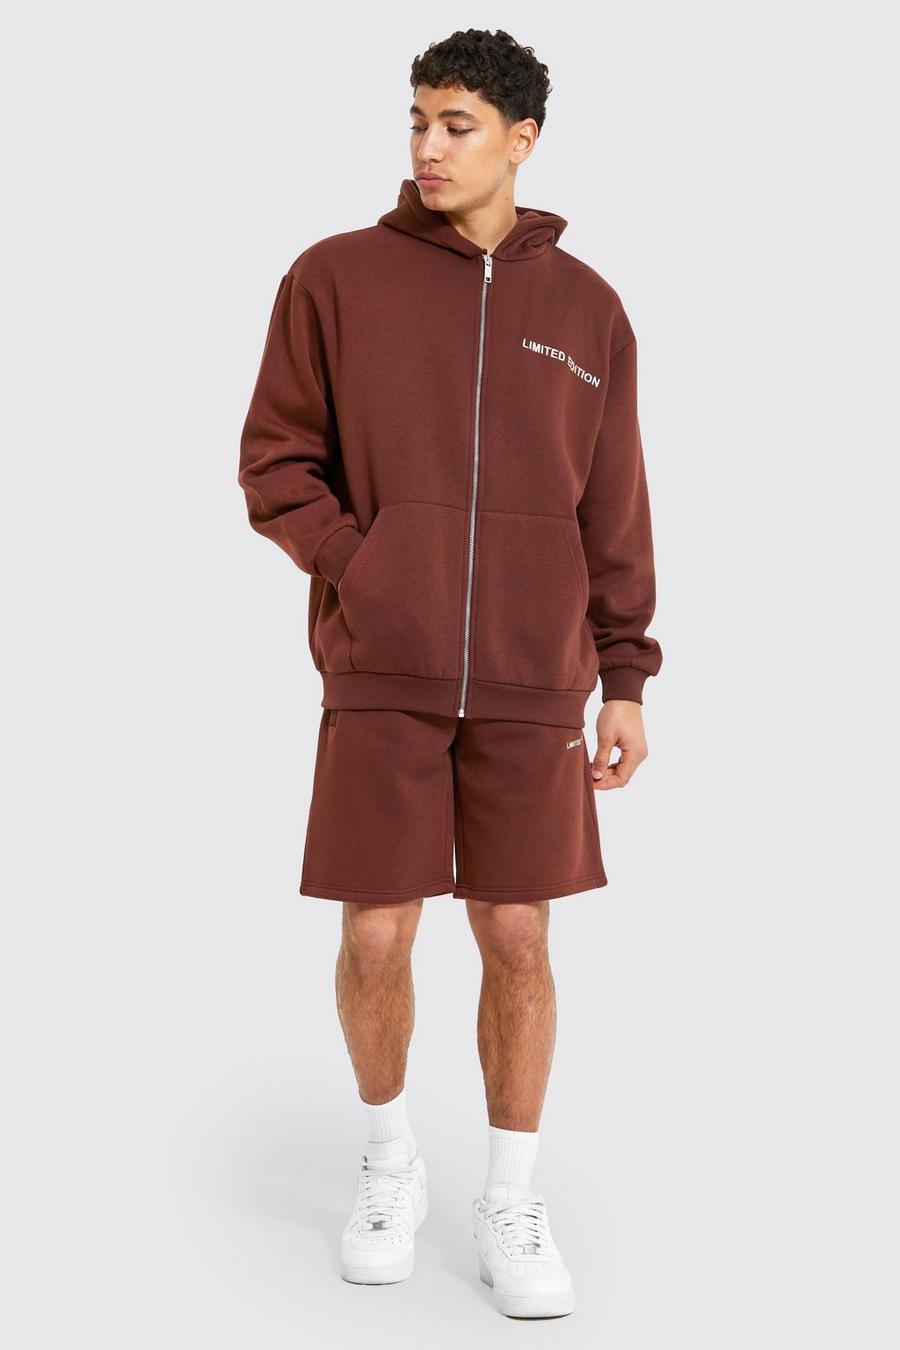 Chocolate brown Oversized Limited Zip Hooded Short Tracksuit